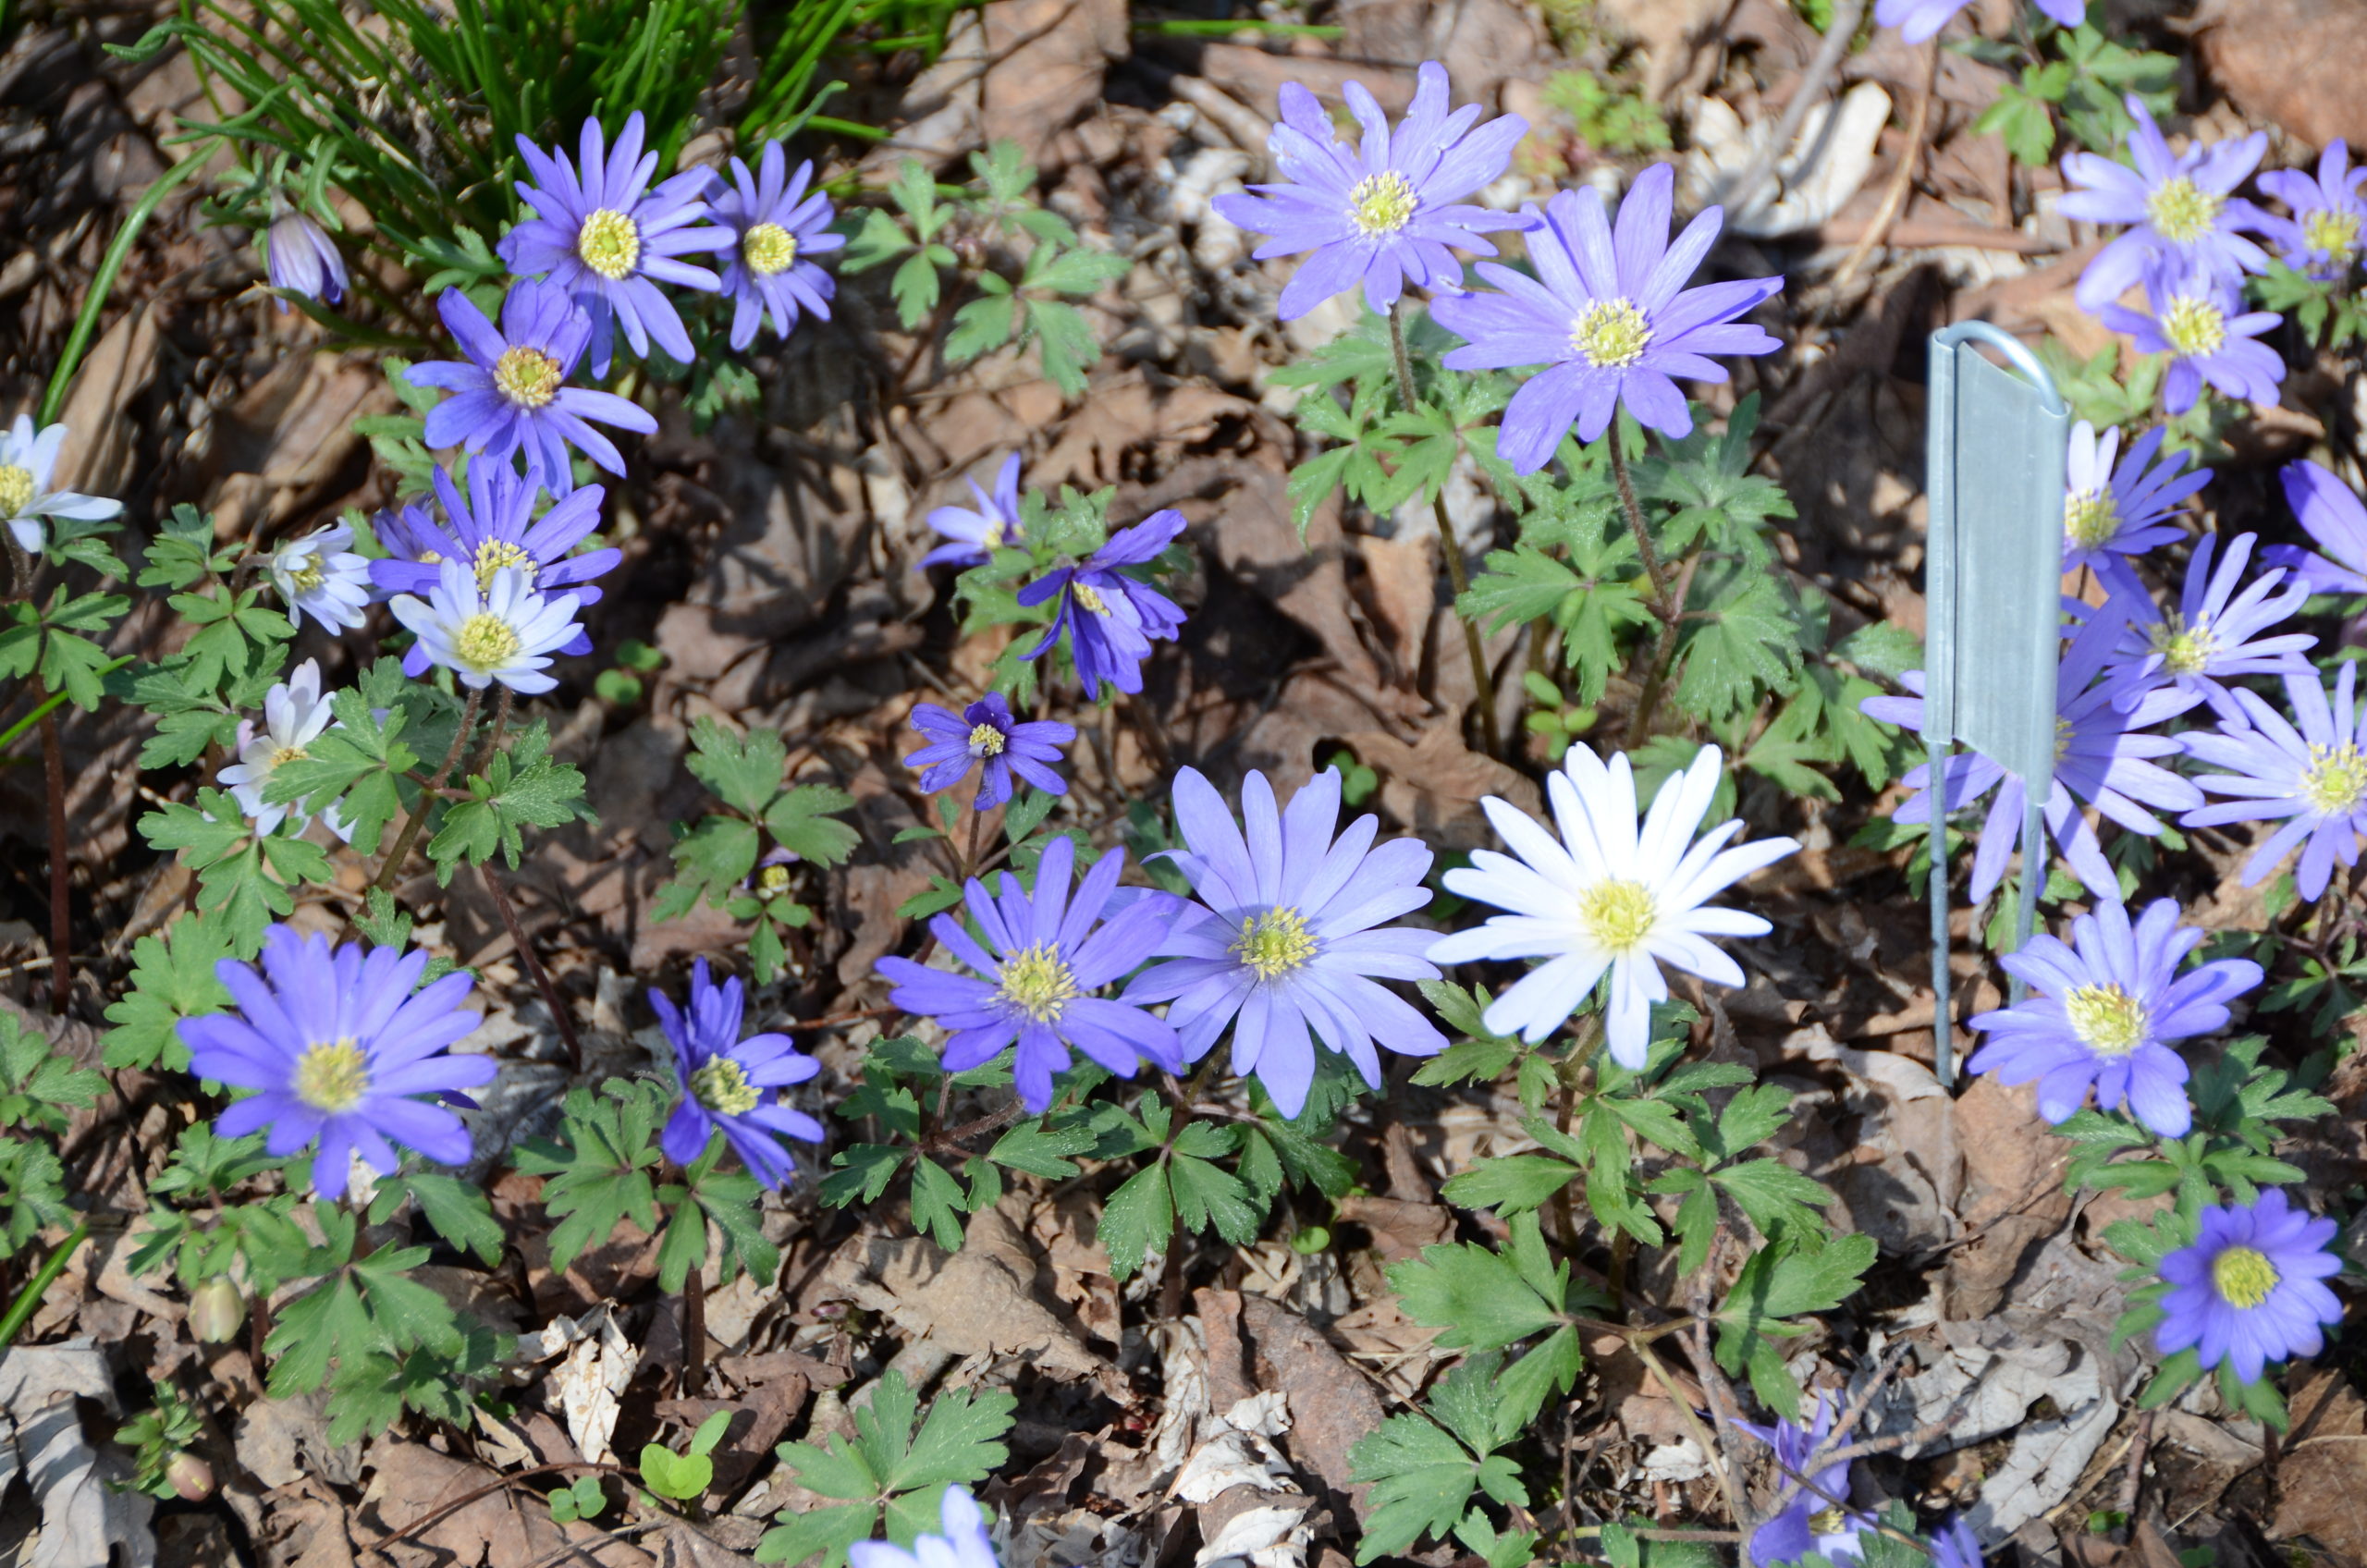 Anemone blanda, or the windflower, will bloom in mid to late April. Short and very attractive, it’s one of the minor bulbs that’s great in mass plantings or as an “edger.” It naturalizes, lasts for years and years, and doesn’t seem to be bothered by rodents.